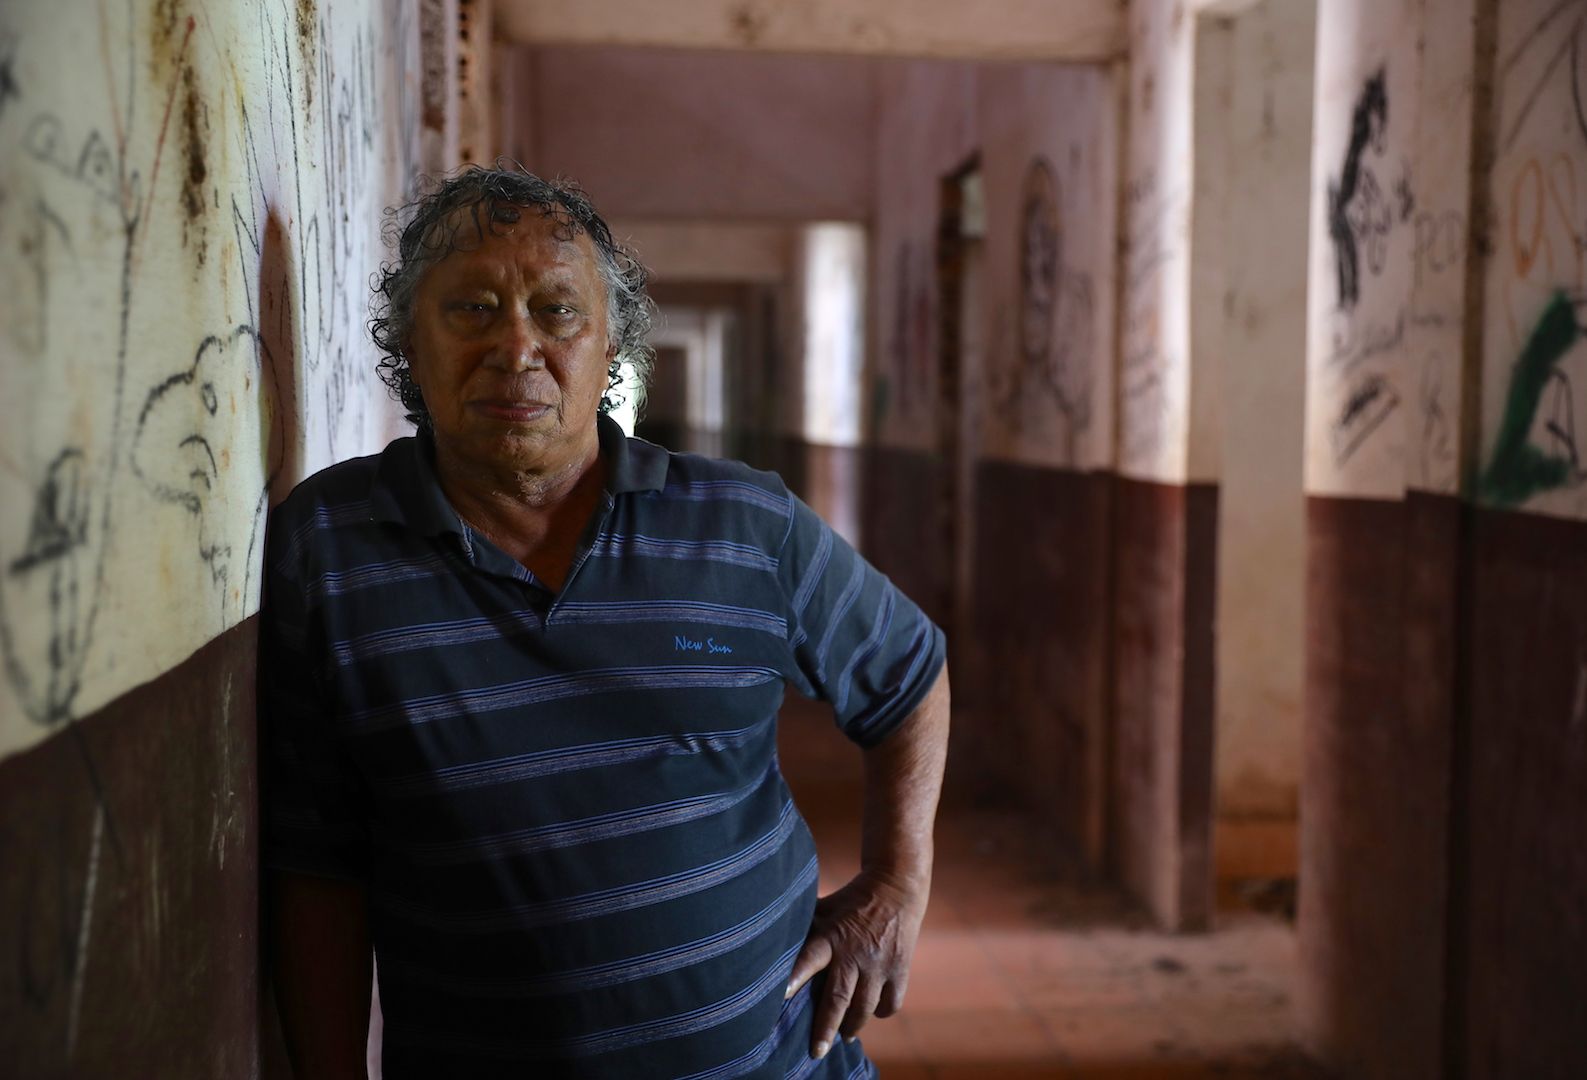 Agenor Gomes Cardoso, who was relocated to the Prata Colony after being diagnosed with leprosy, leans on the walls of the now-abandoned hospital, where he had received treatment. Image by Anton L. Delgado. Brazil, 2020.